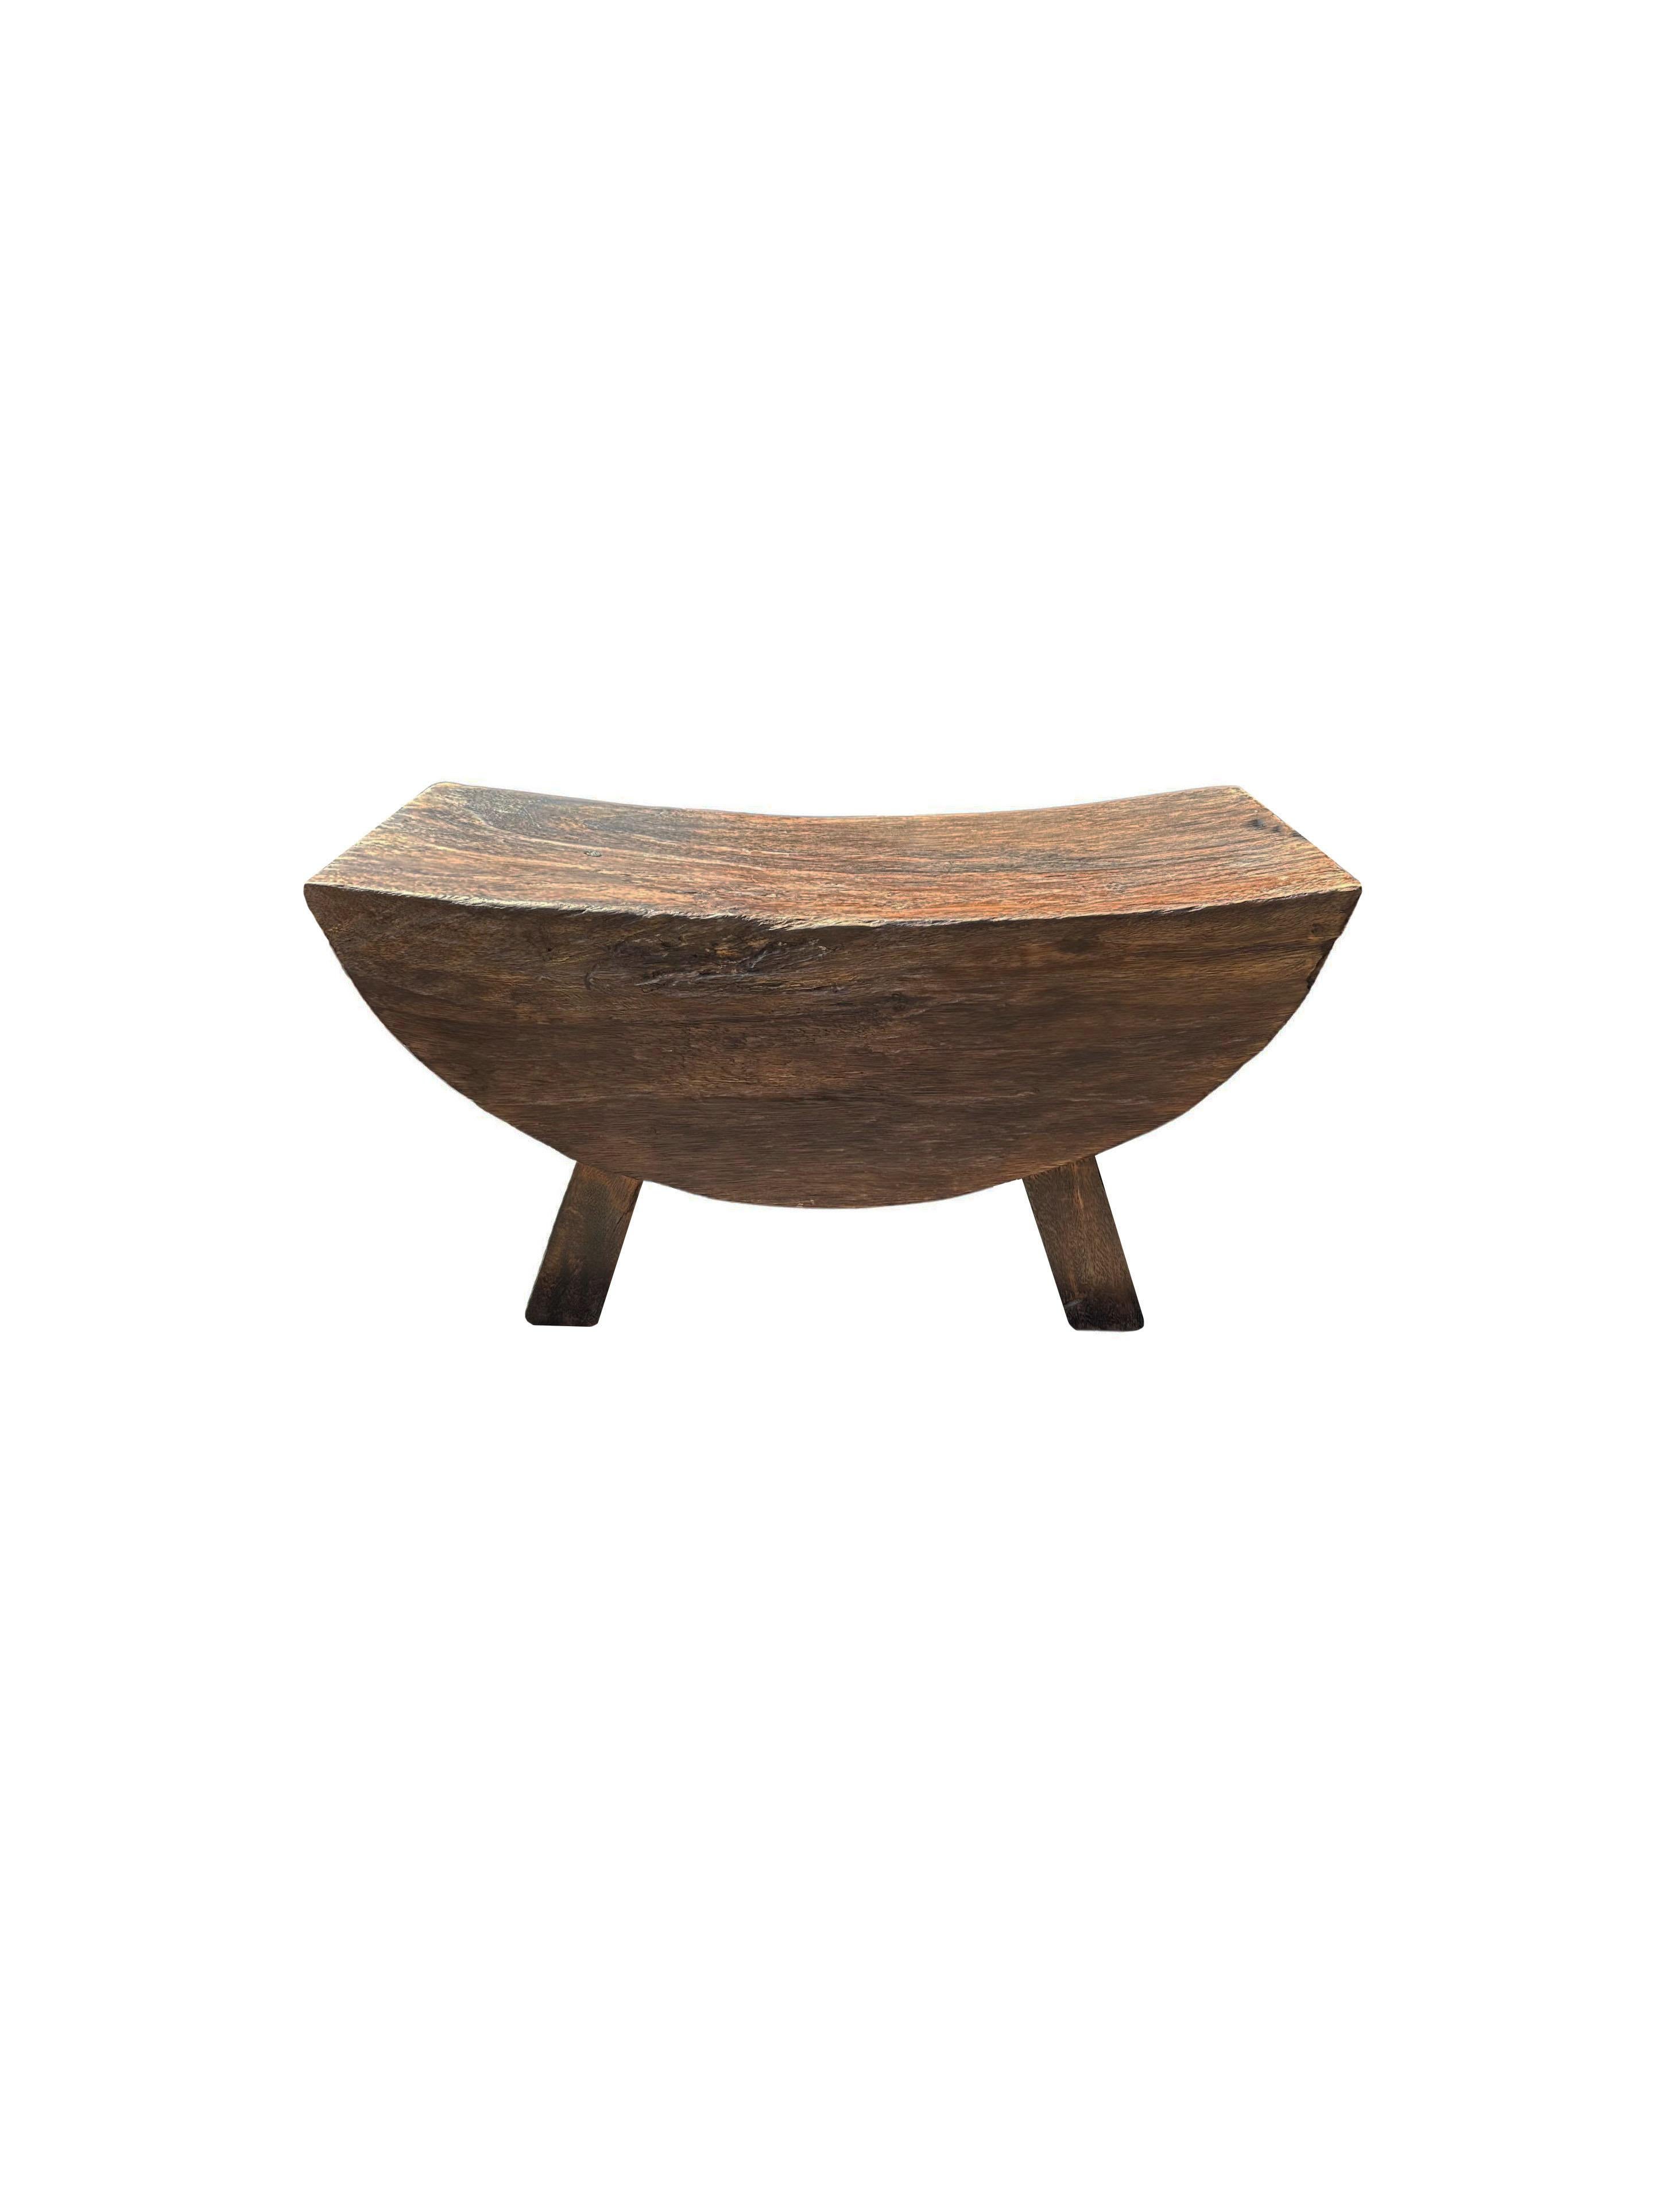 Organic Modern Sculptural Stool with Curved Seat Suar Wood  For Sale